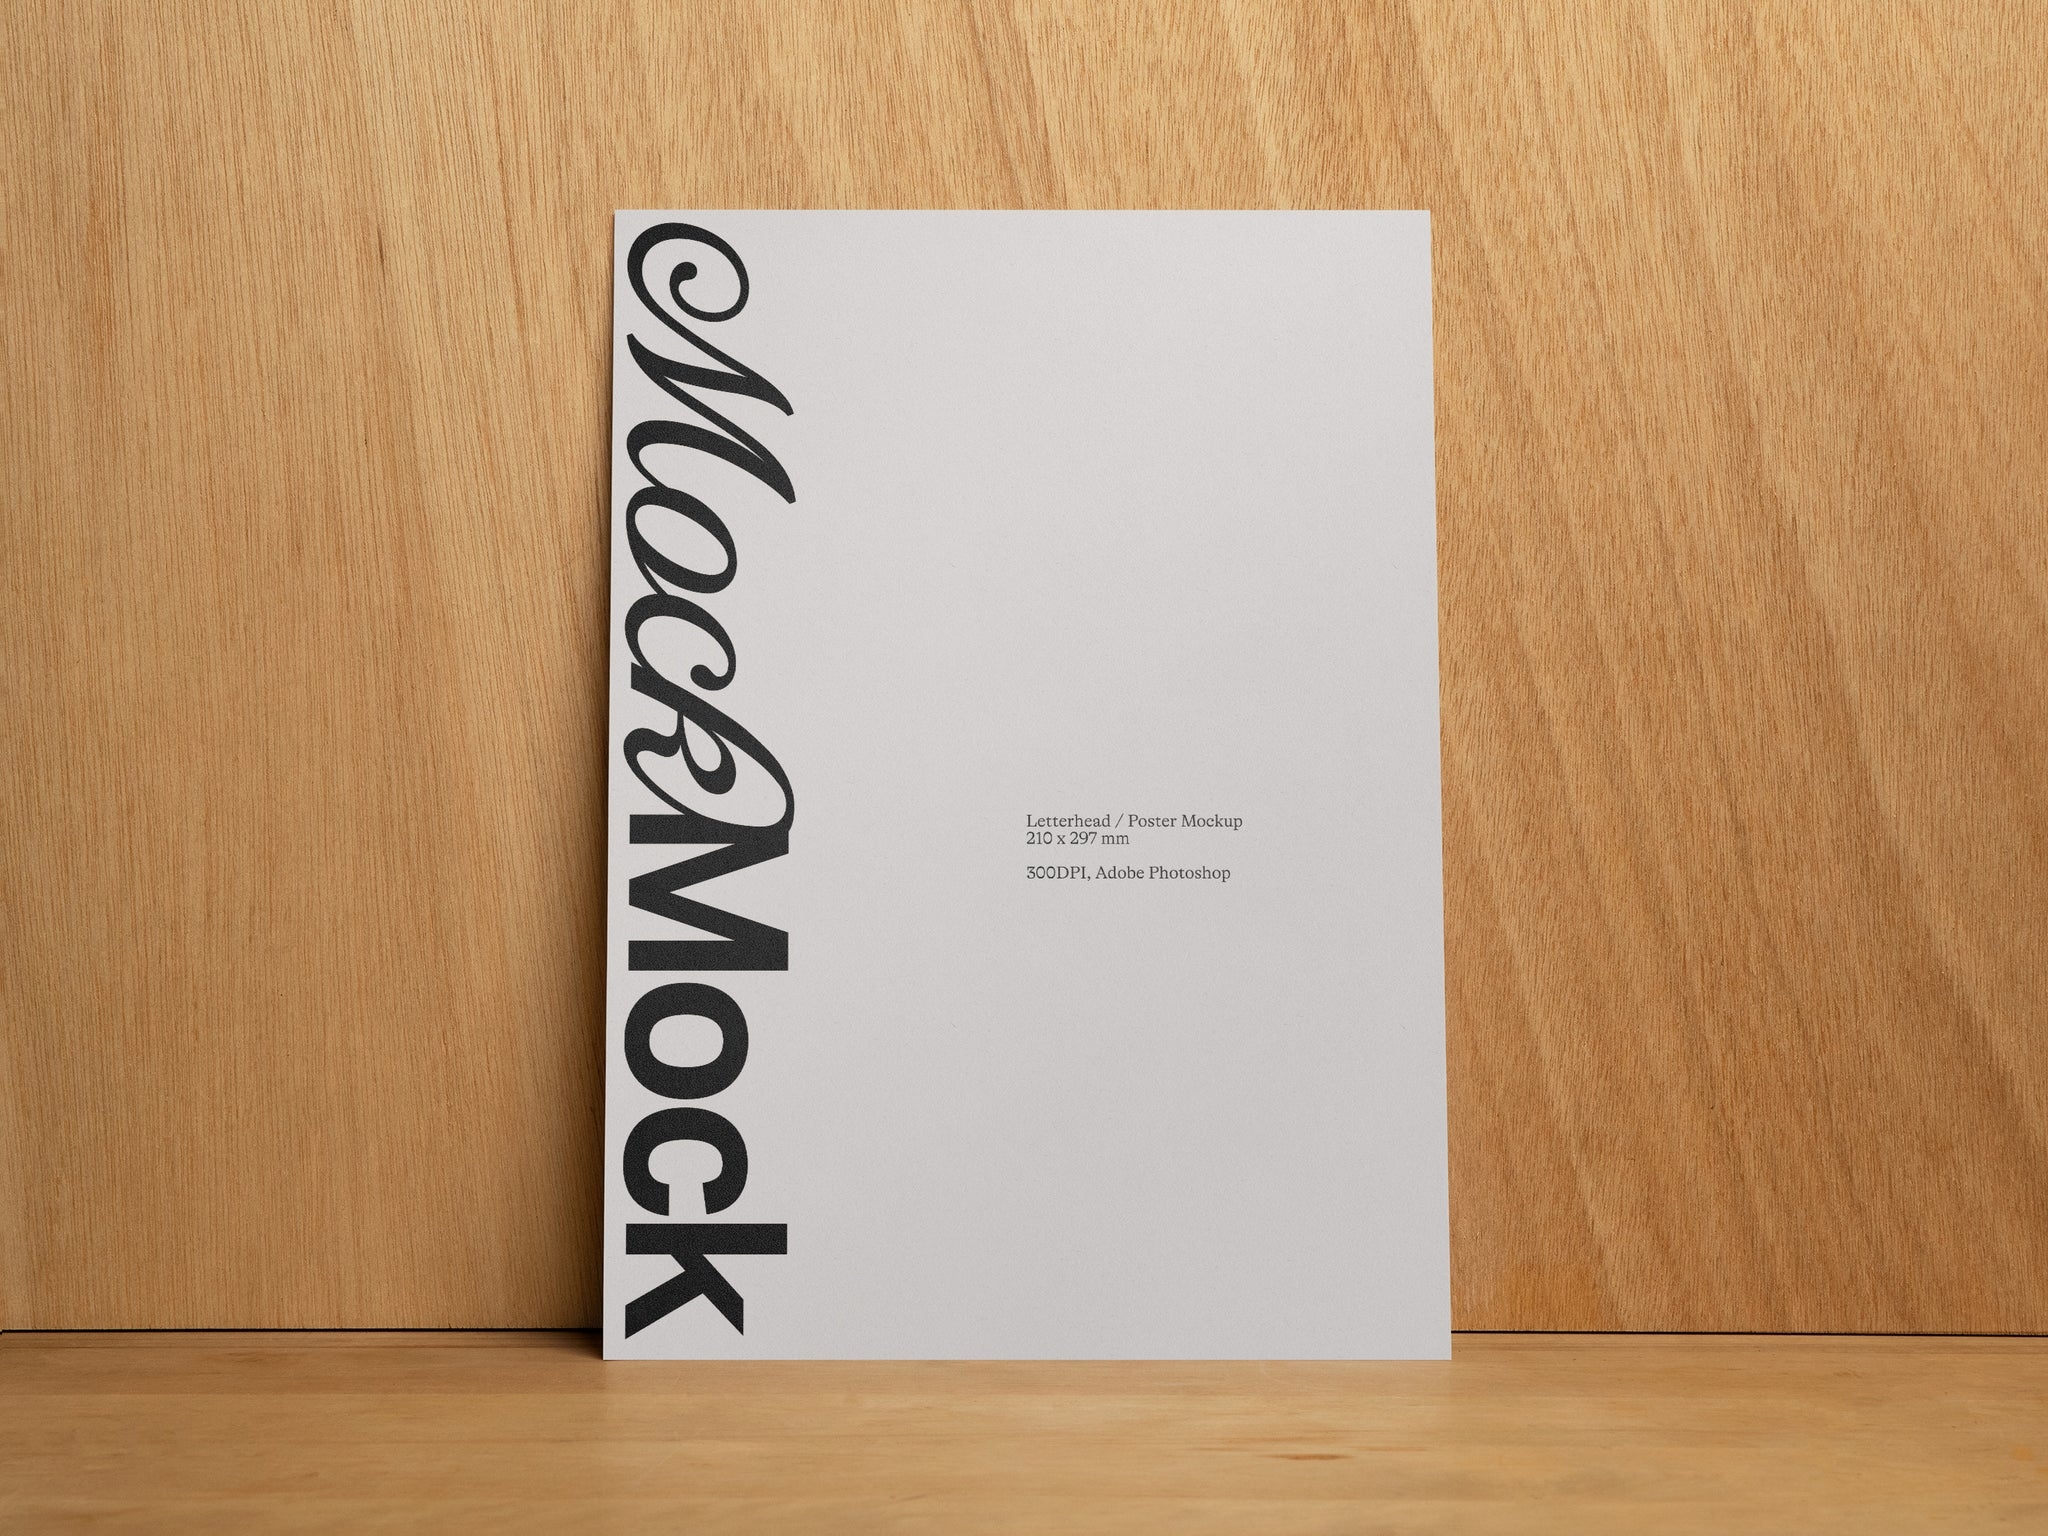 Poster Print Mockup on a wooden background